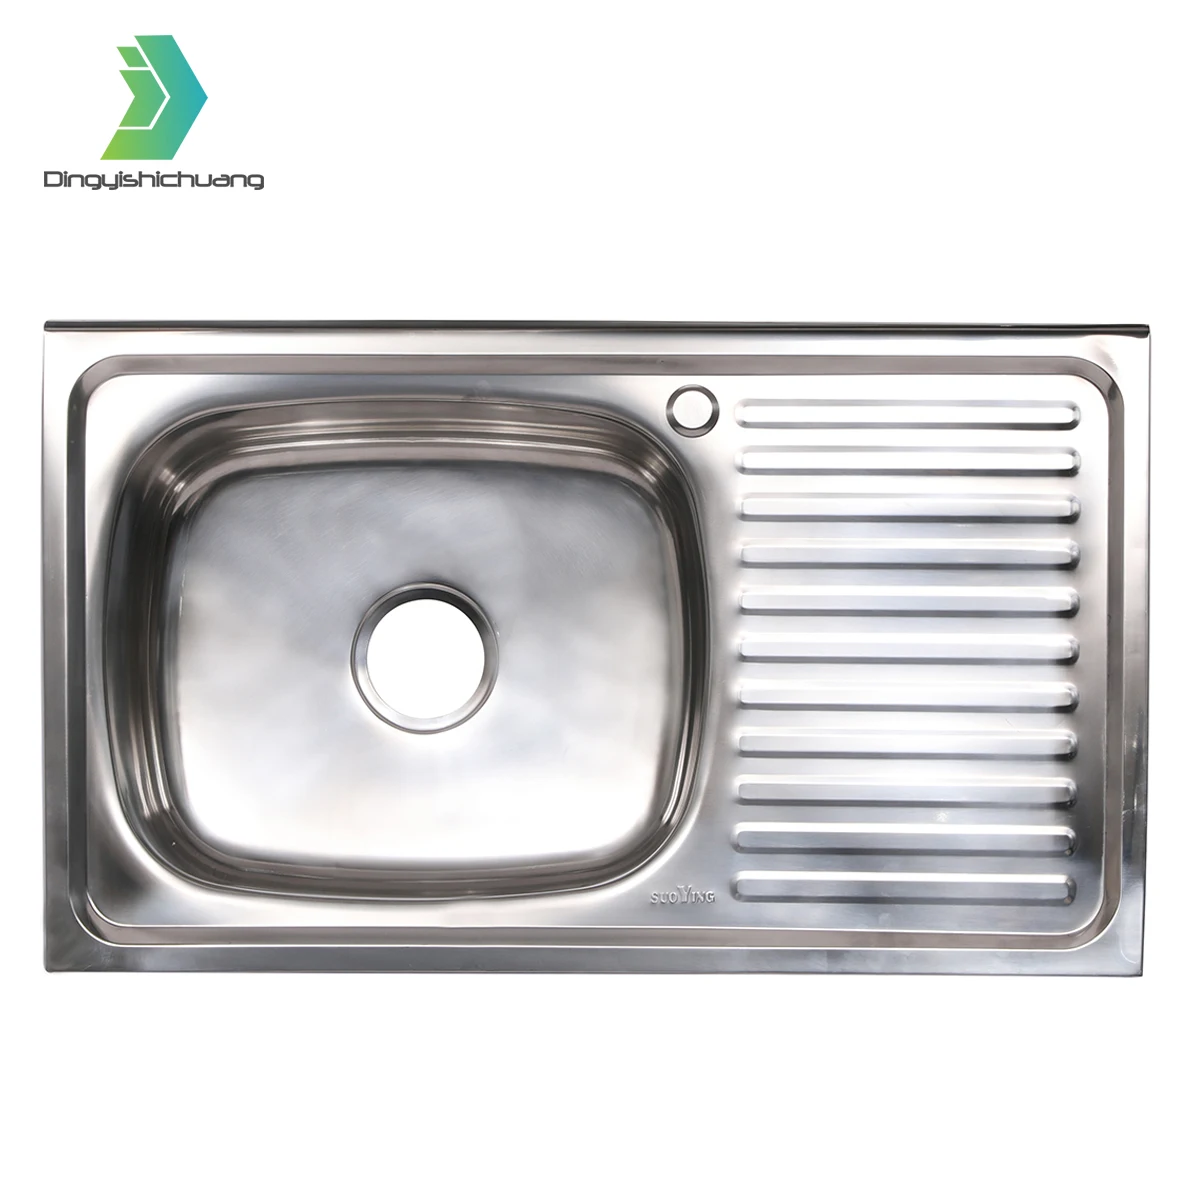 Unique Drainboard Stainless Steel Sink 304 Basin Deep Laundry Kitchen Sink For Cabinet